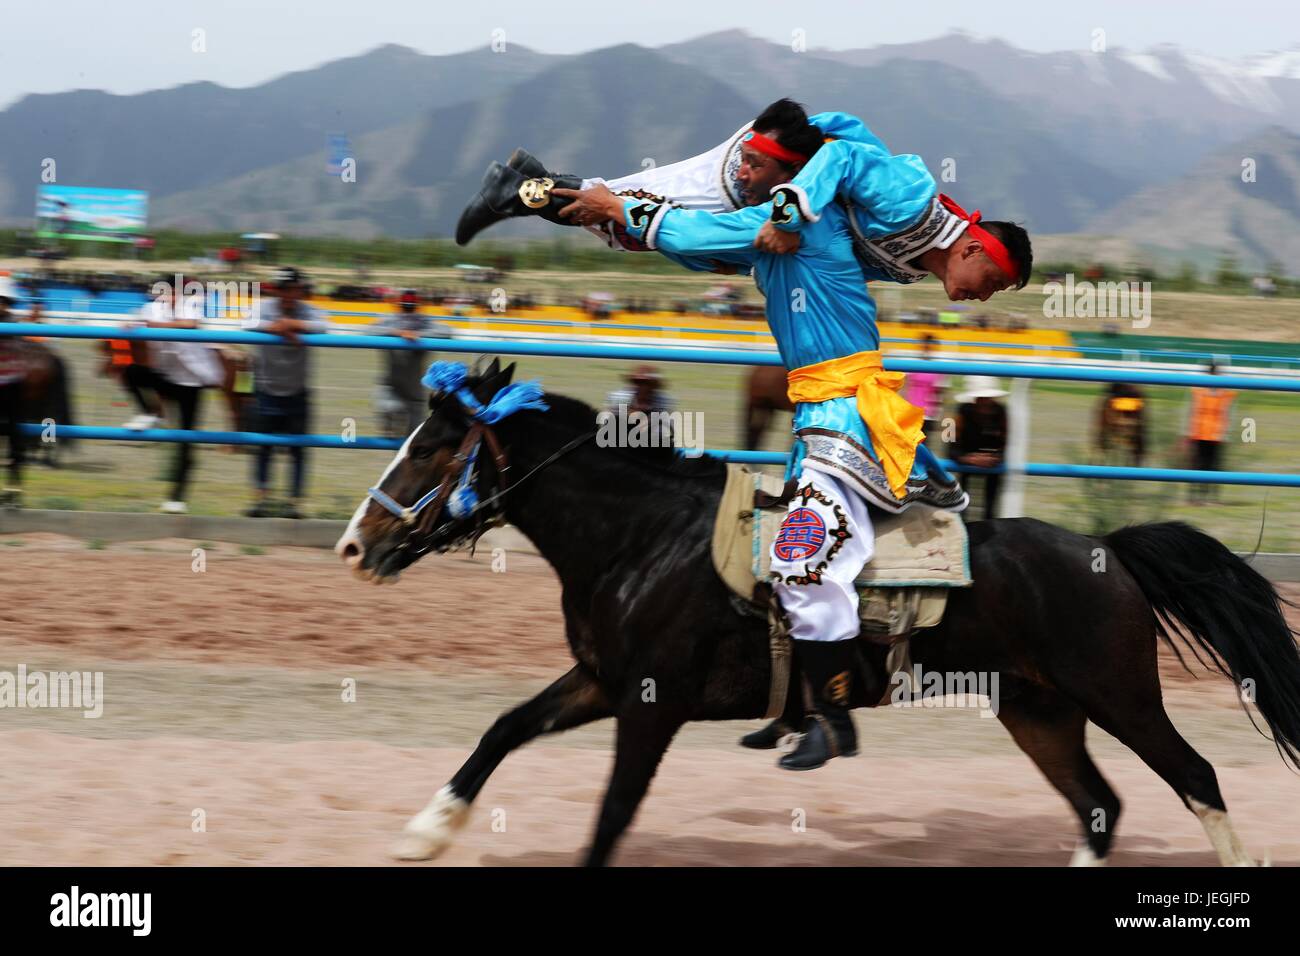 Zhangye, China's Gansu Province. 24th June, 2017. Competitors perform equestrianism during a horse racing event in Sunan County, northwest China's Gansu Province, June 24, 2017. Credit: Cheng Lin/Xinhua/Alamy Live News Stock Photo